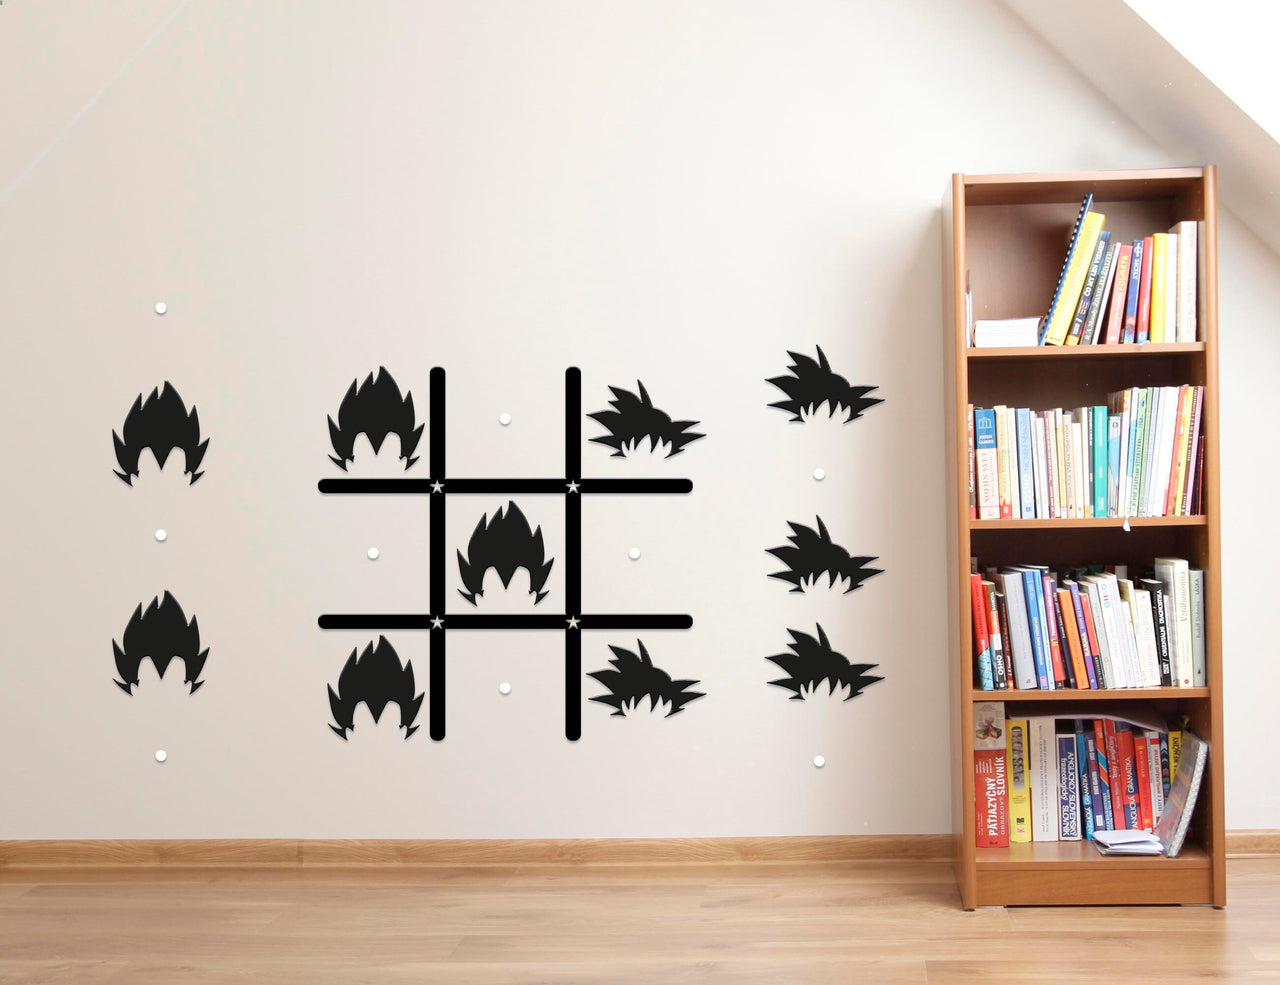 Dragon Tic-Tac-Toe Game Wall Art - Tic Tac Toe Playroom Kids Game - Games for Family Time - Noughts and Crosses Game - Board Game for Kids